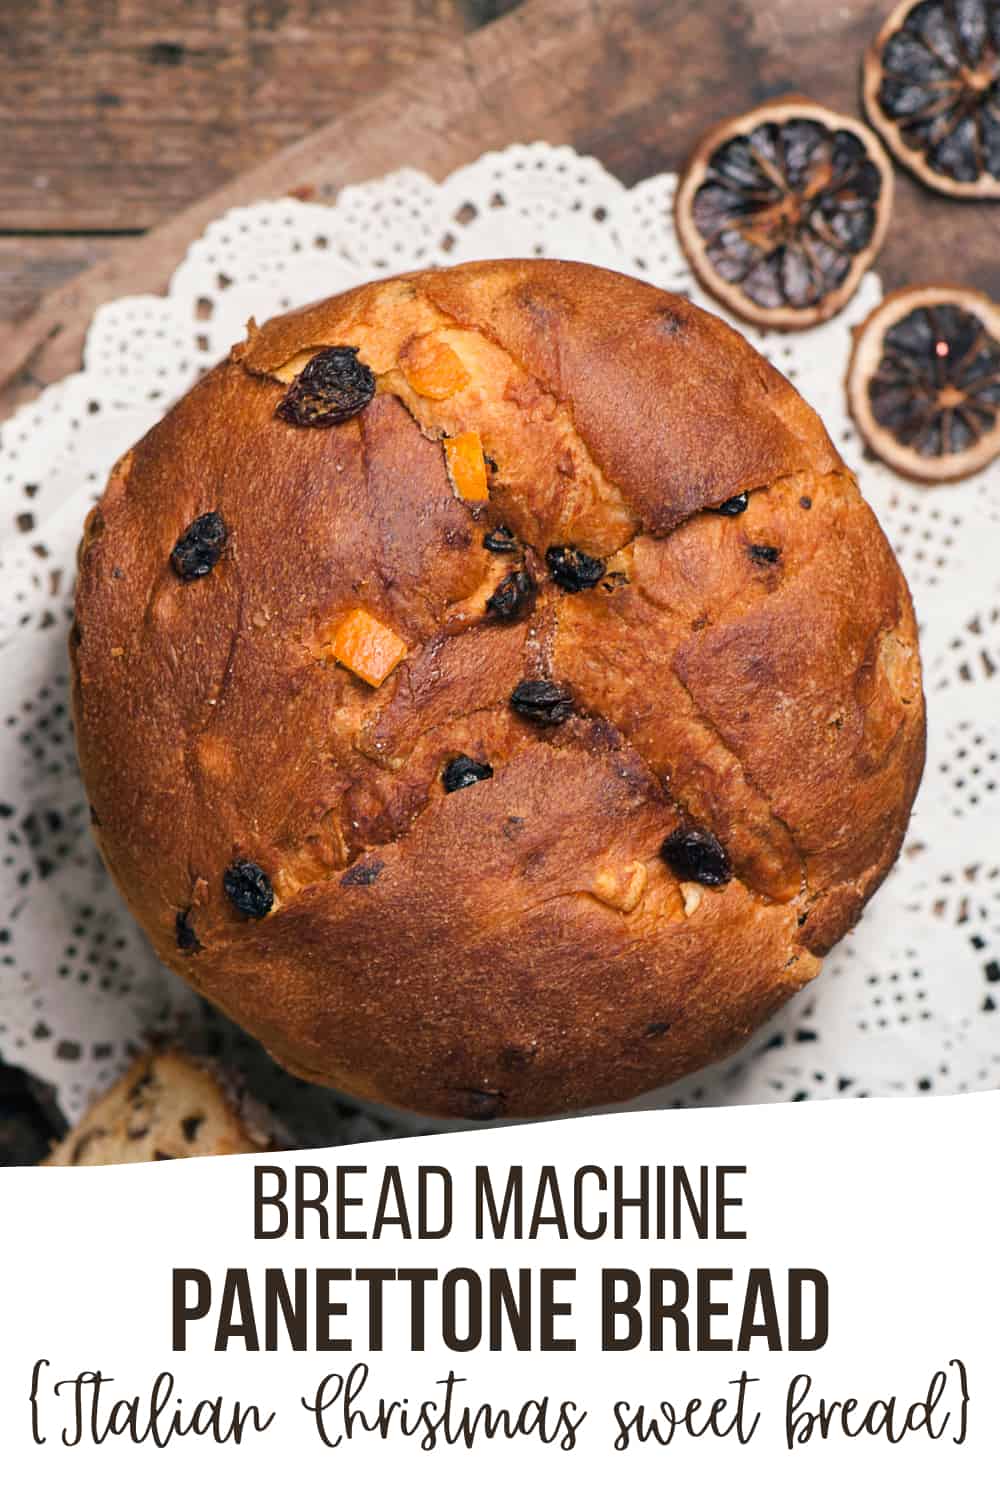 panettone bread made in a bread machine and baked in the oven